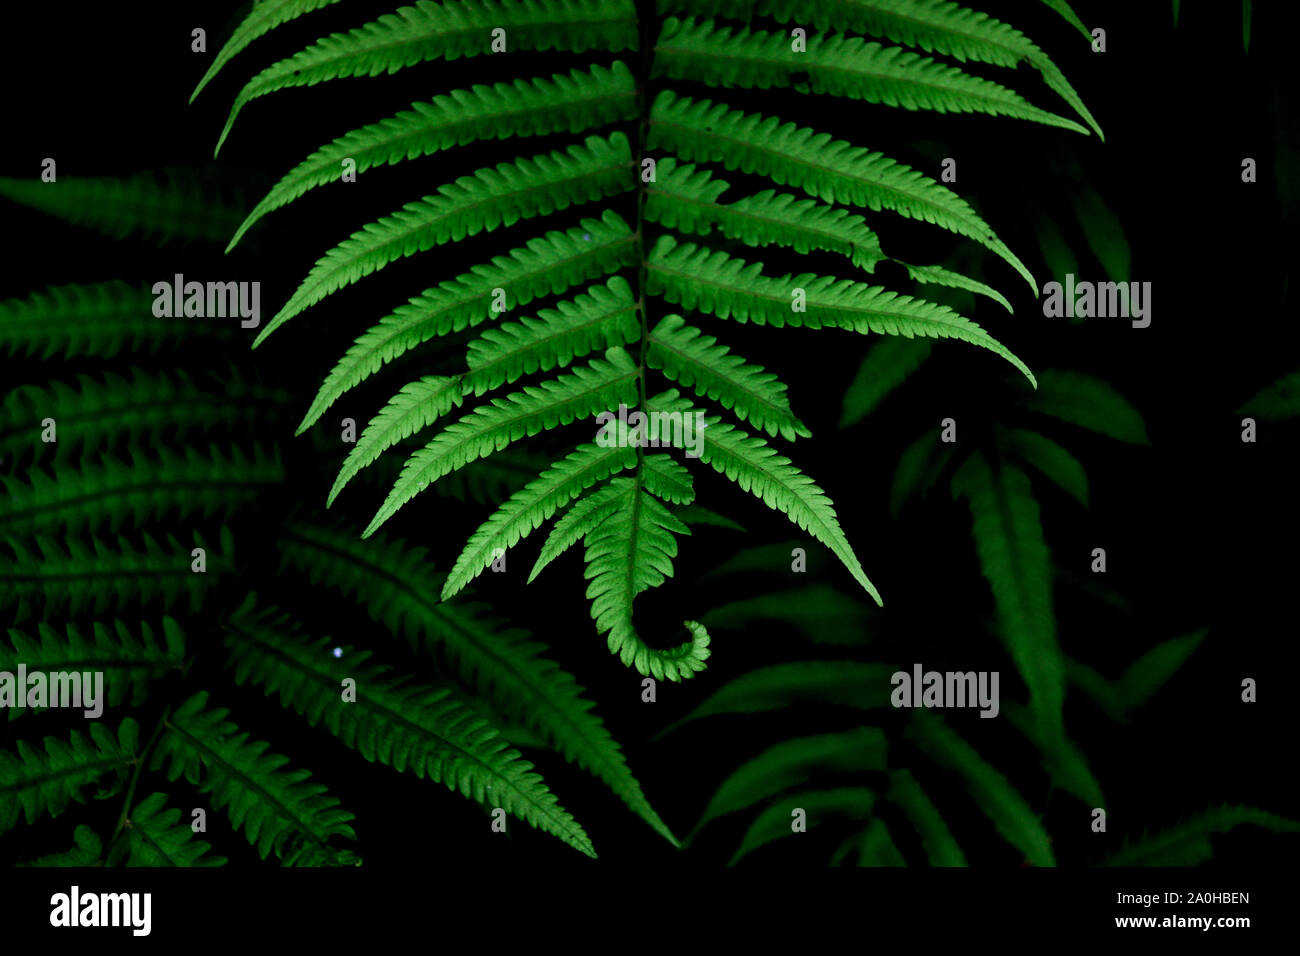 Fresh rich texture of fern leaves against a dark background to show growth, wellness, harmony and freshness Stock Photo